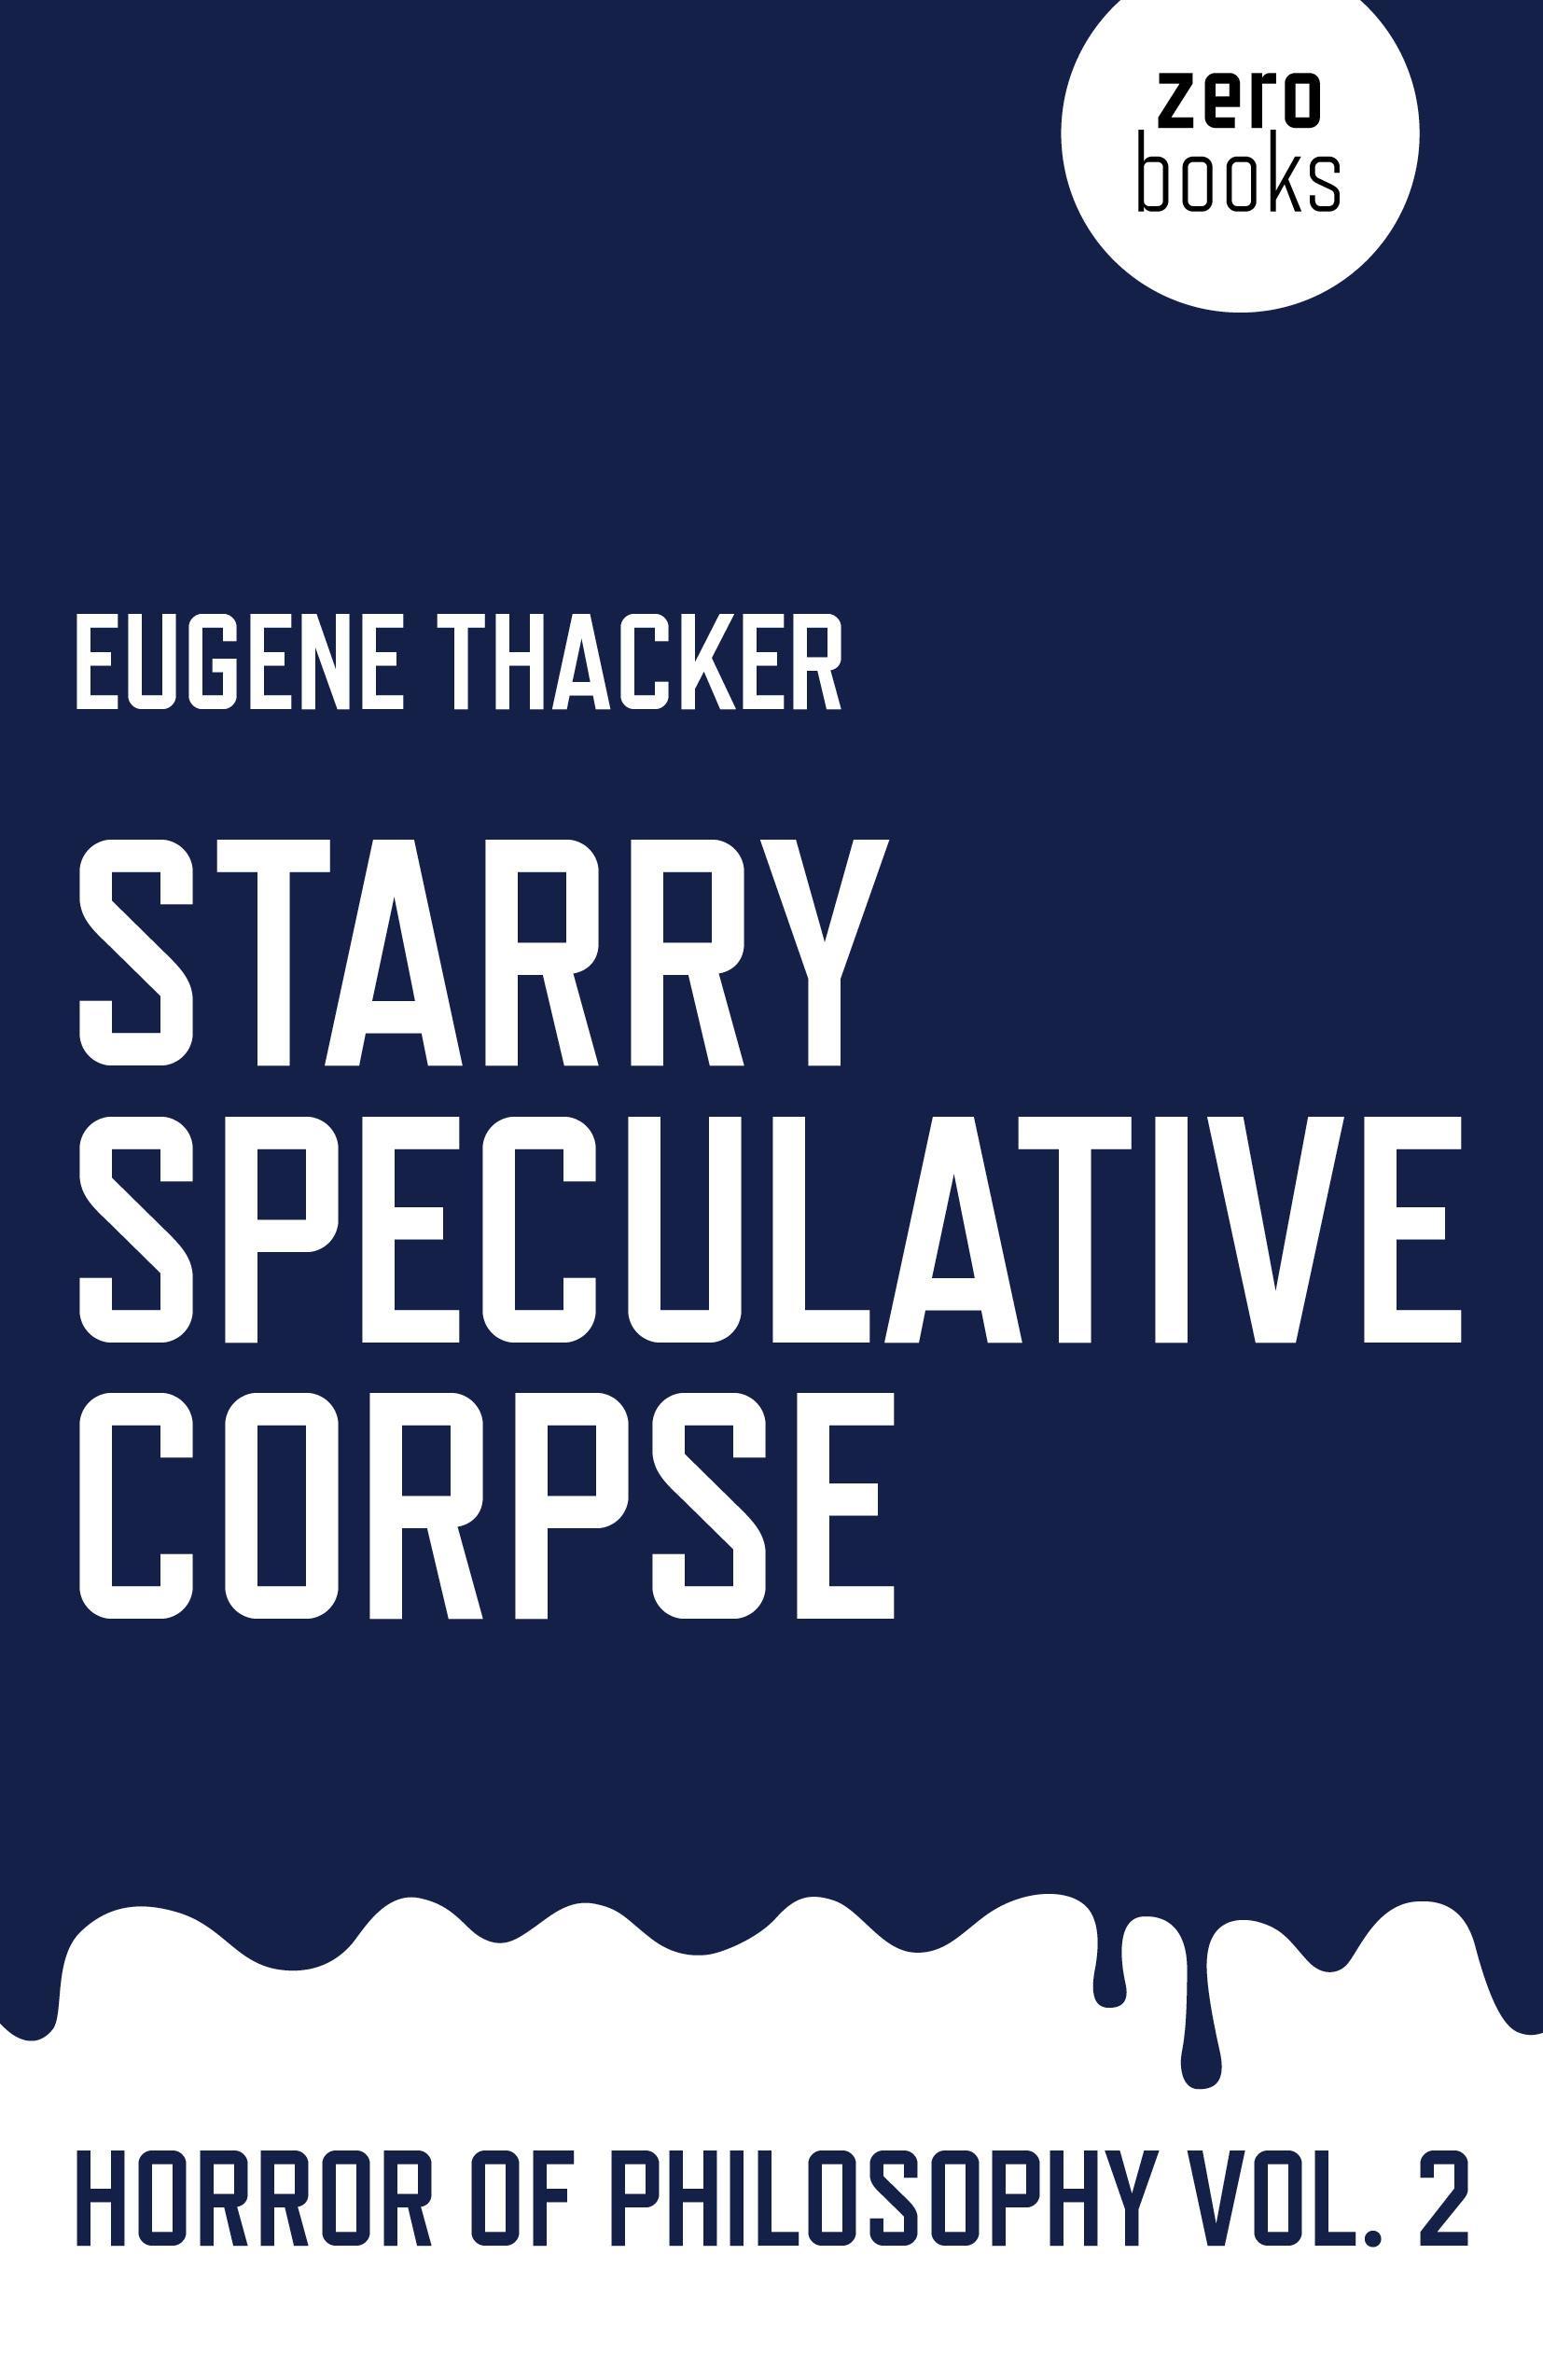 Starry Speculative Corpse